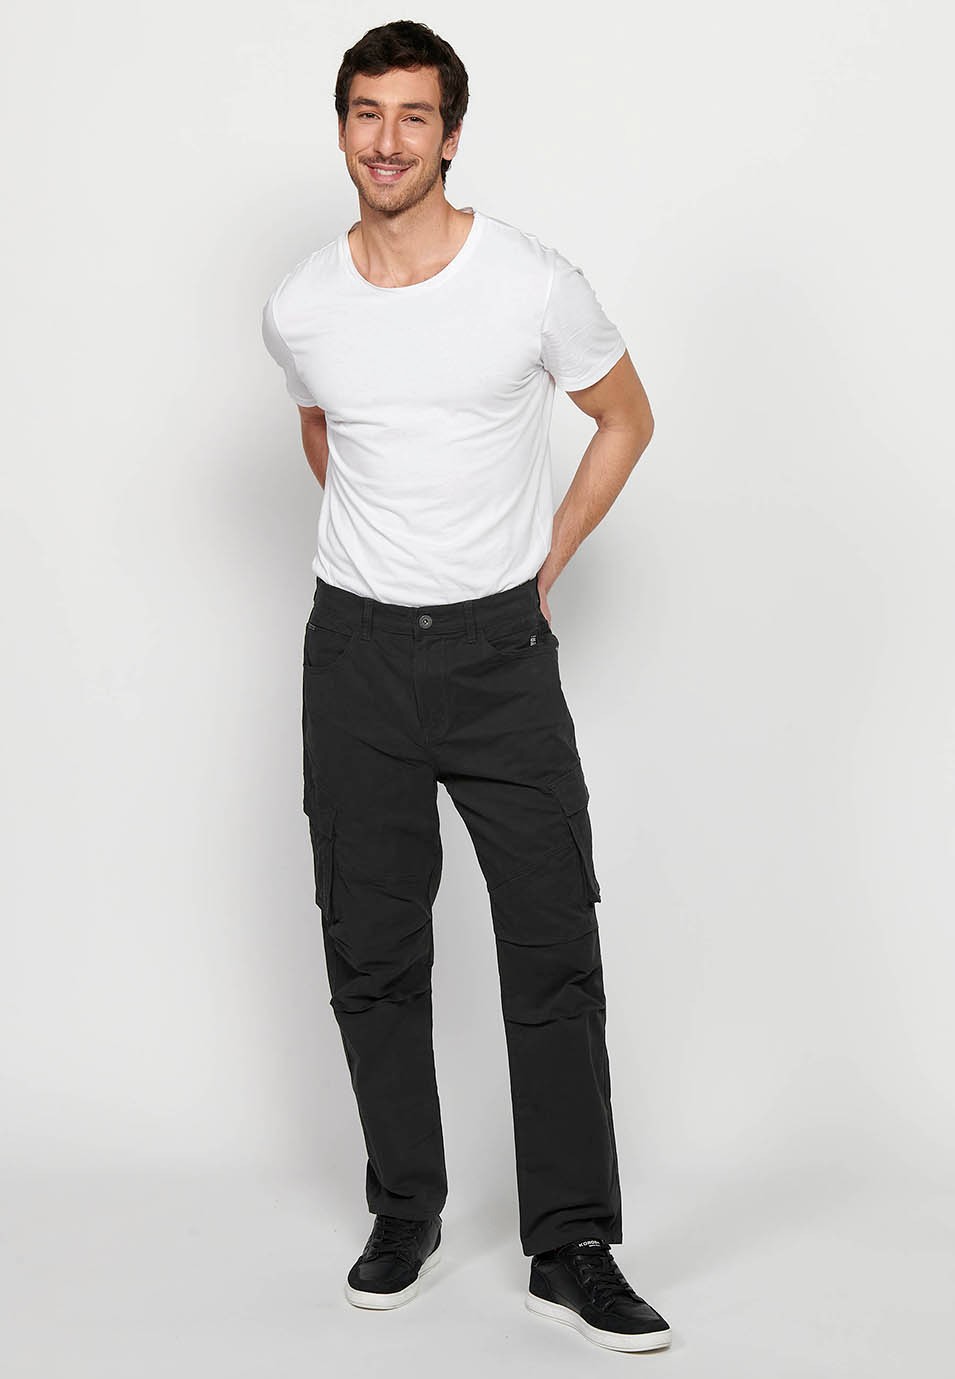 Long cargo pants with front zipper and button closure with side pockets with flap in Black for Men